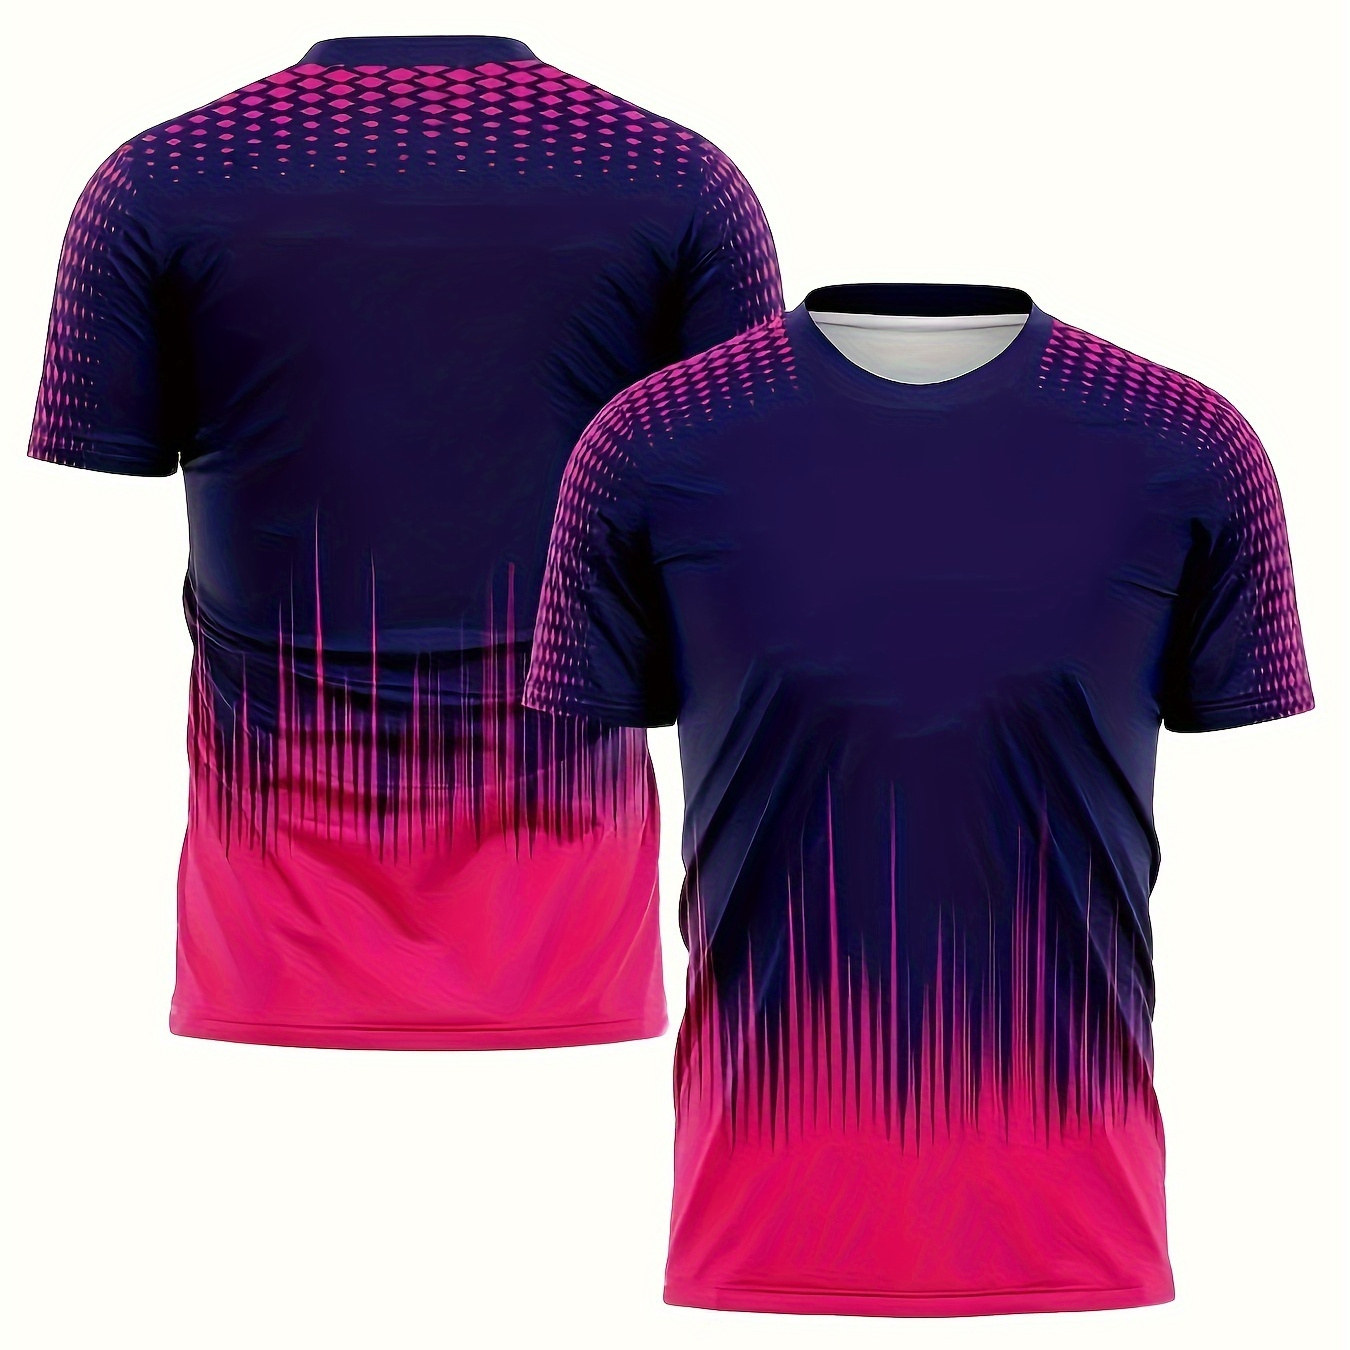 

Graphic T Shirt, Active Tees For Men, Casual Short Sleeve T-shirt For Summer, For Badminton And Table Tennis Training